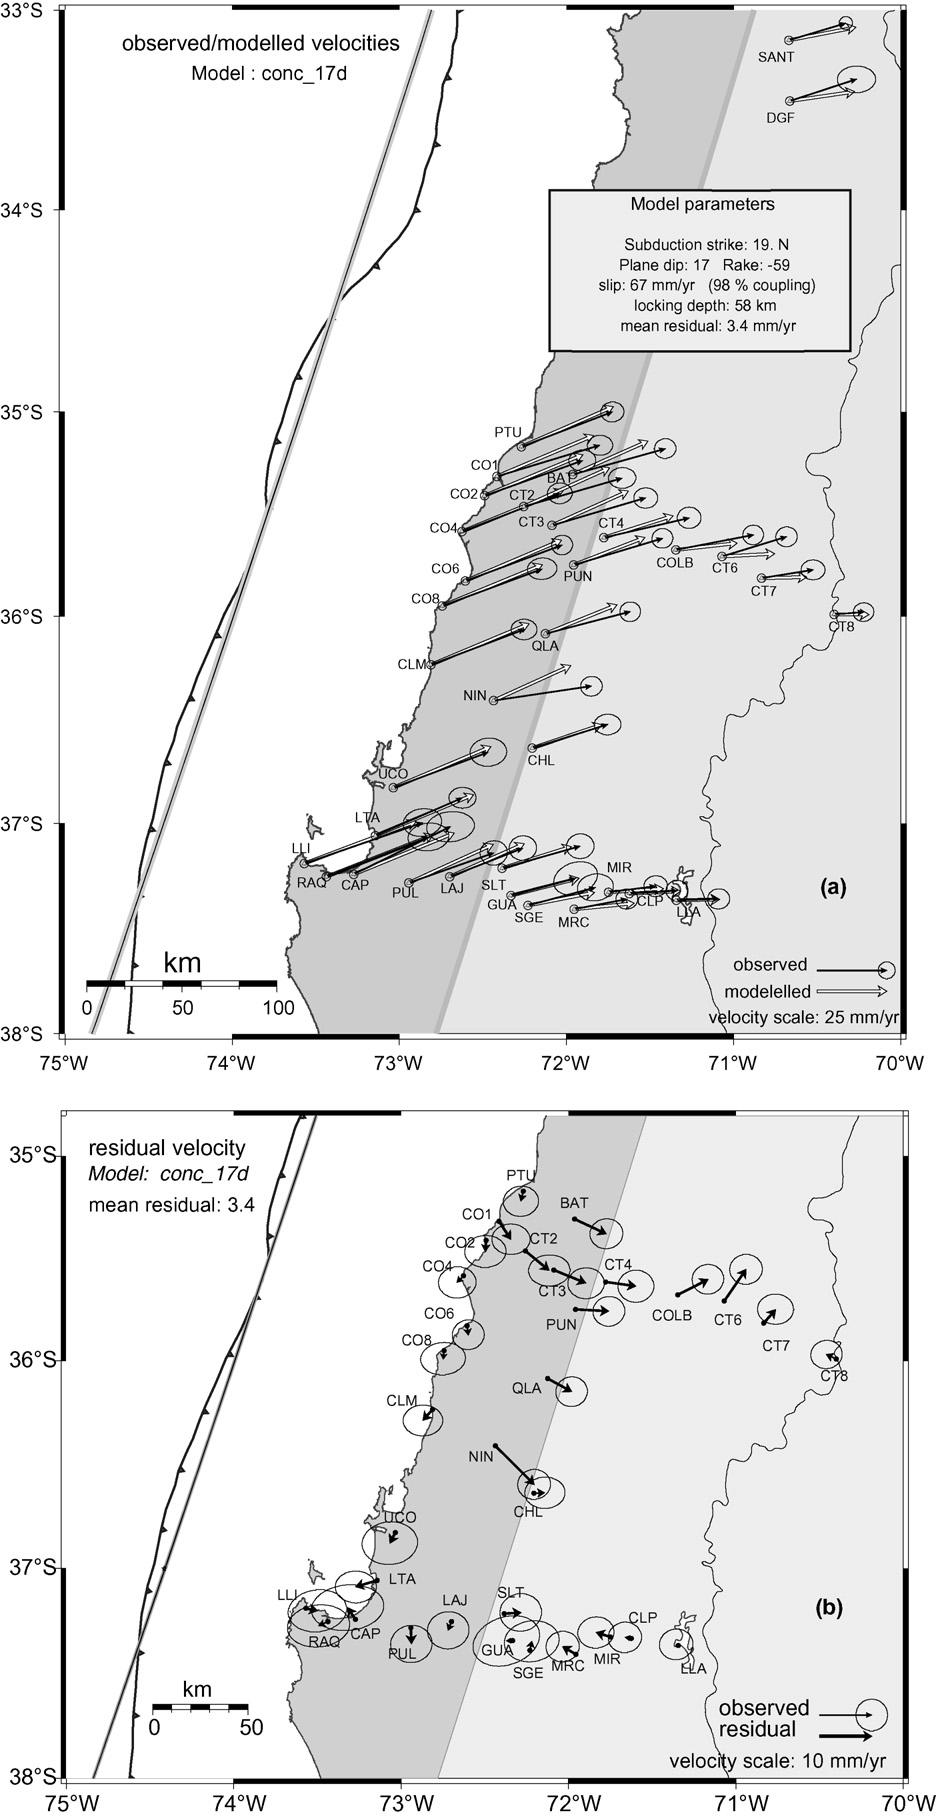 84 J.C. Ruegg et al. / Physics of the Earth and Planetary Interiors 175 (2009) 78 85 Fig. 5. Elastic modelling of the upper plate deformation in the South Central Chile gap.